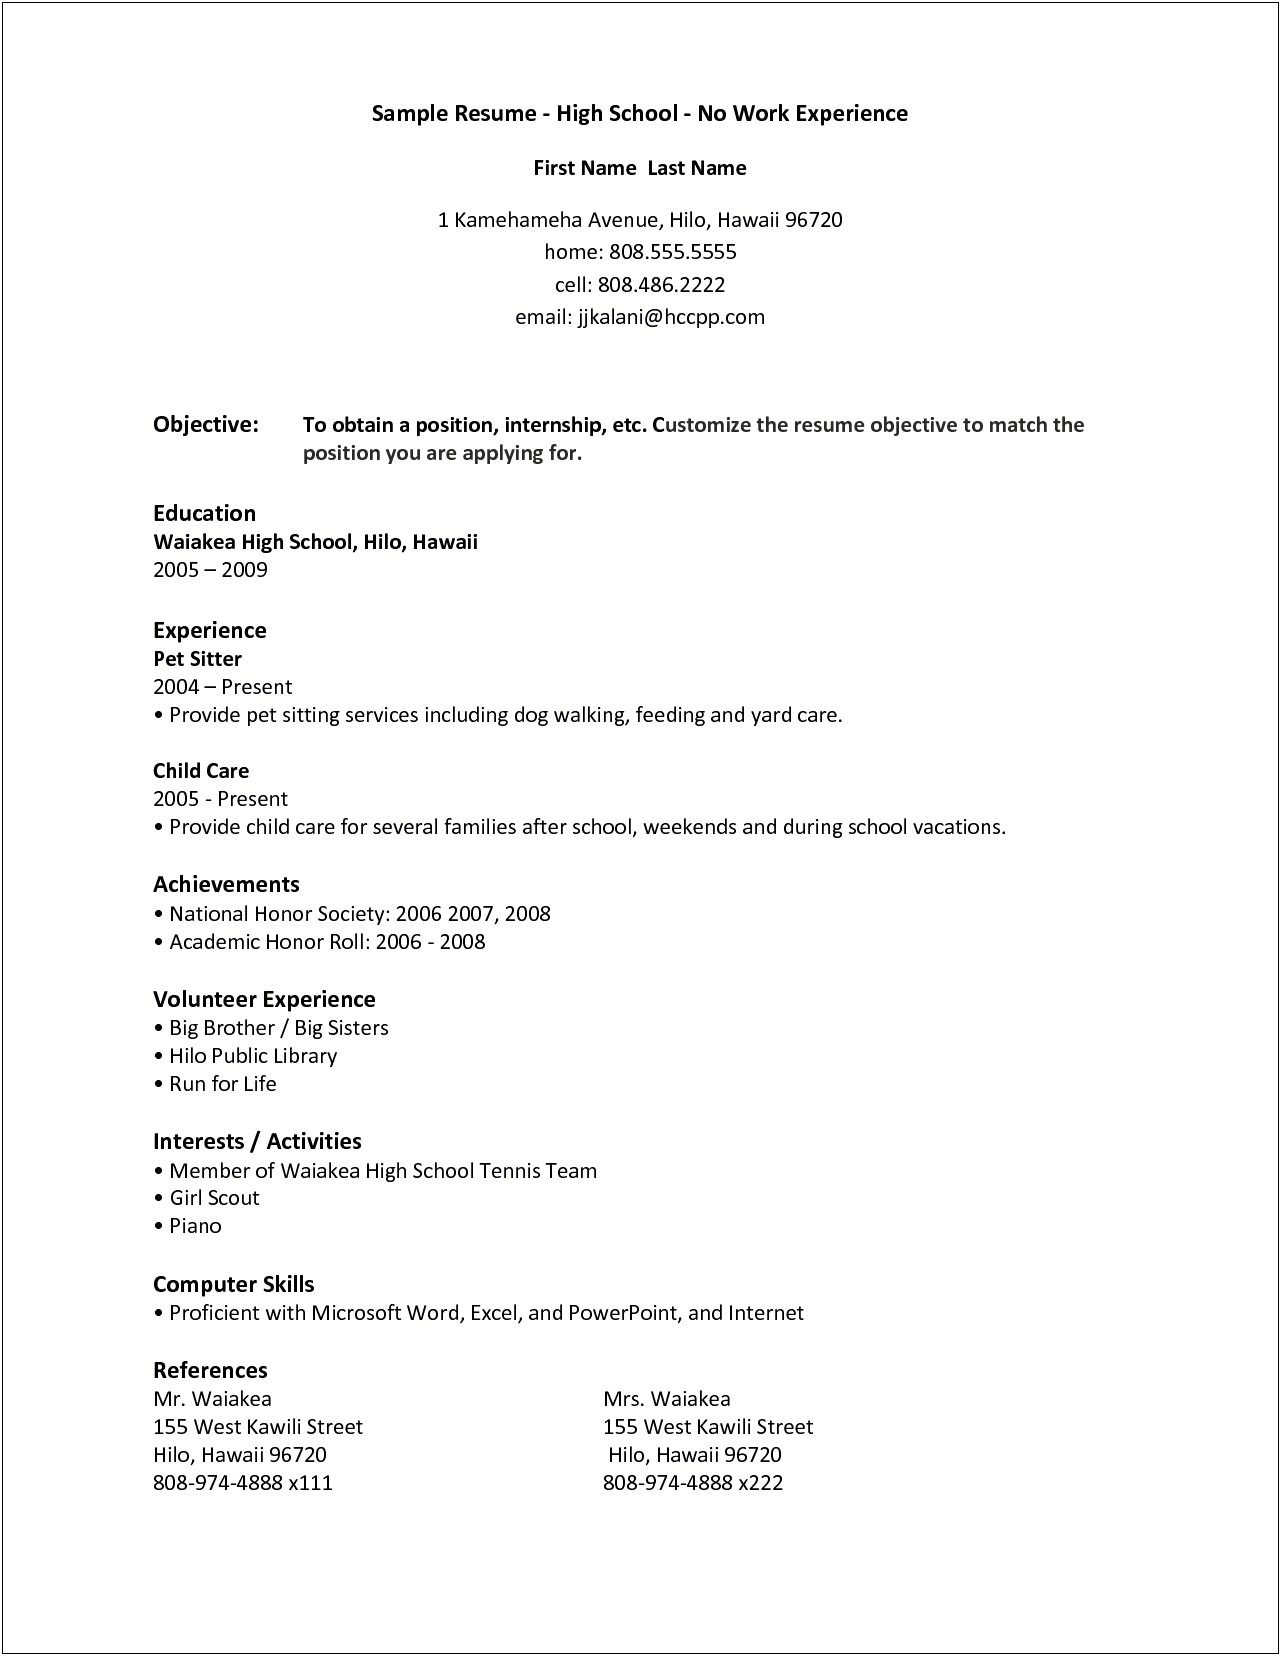 Best Resume With No Work Experience